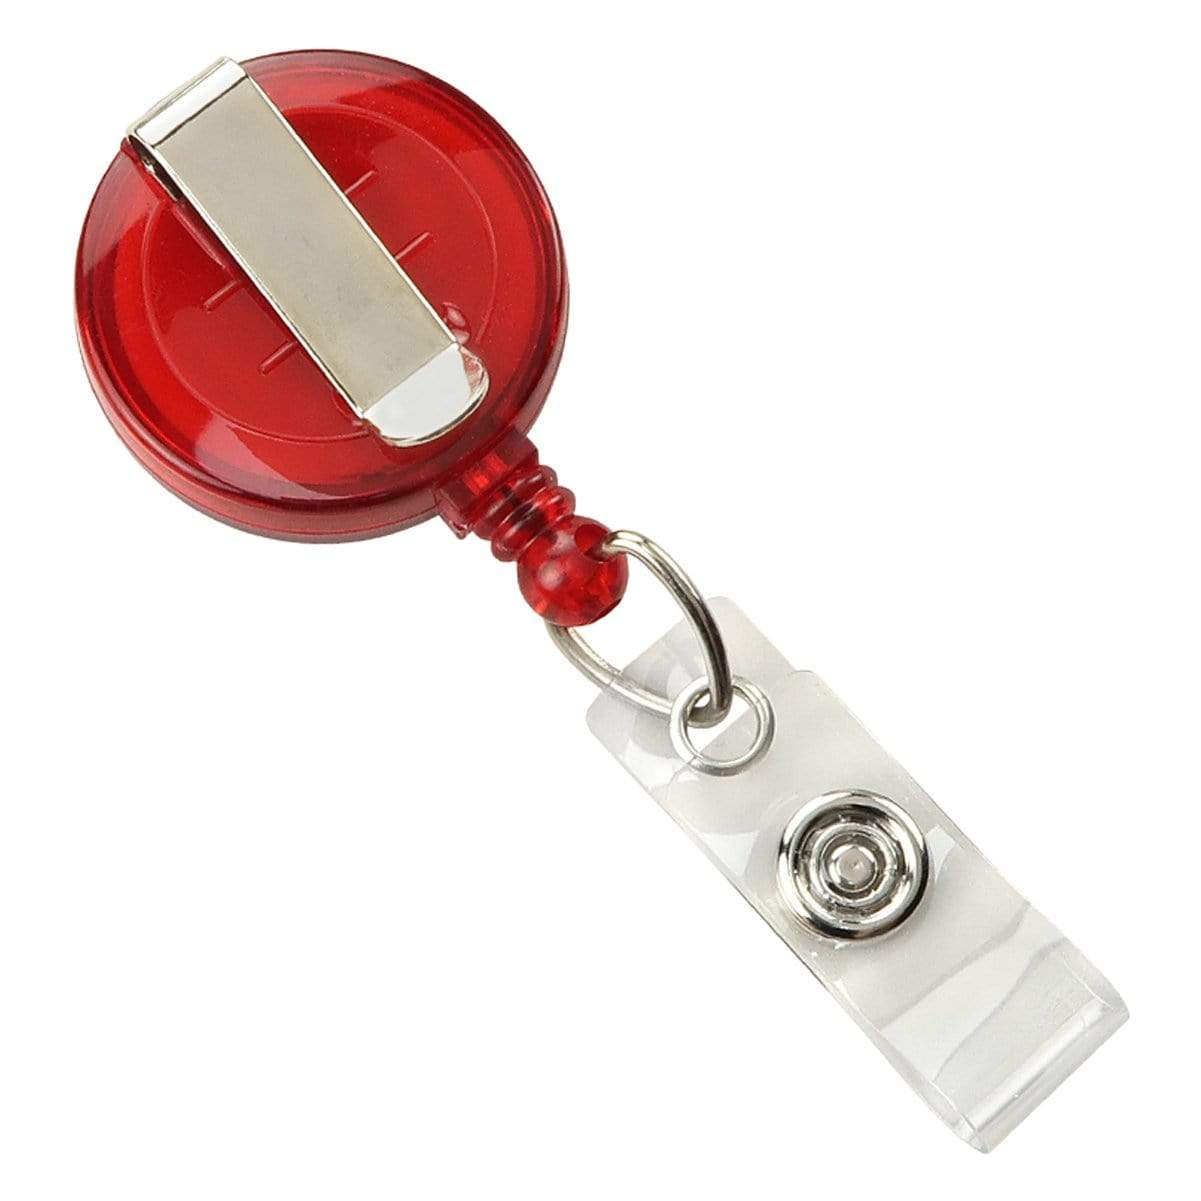 Clear Badge Reel With Belt Clip and Retractable Cord (2120-3600) and More Translucent  Badge Reels at